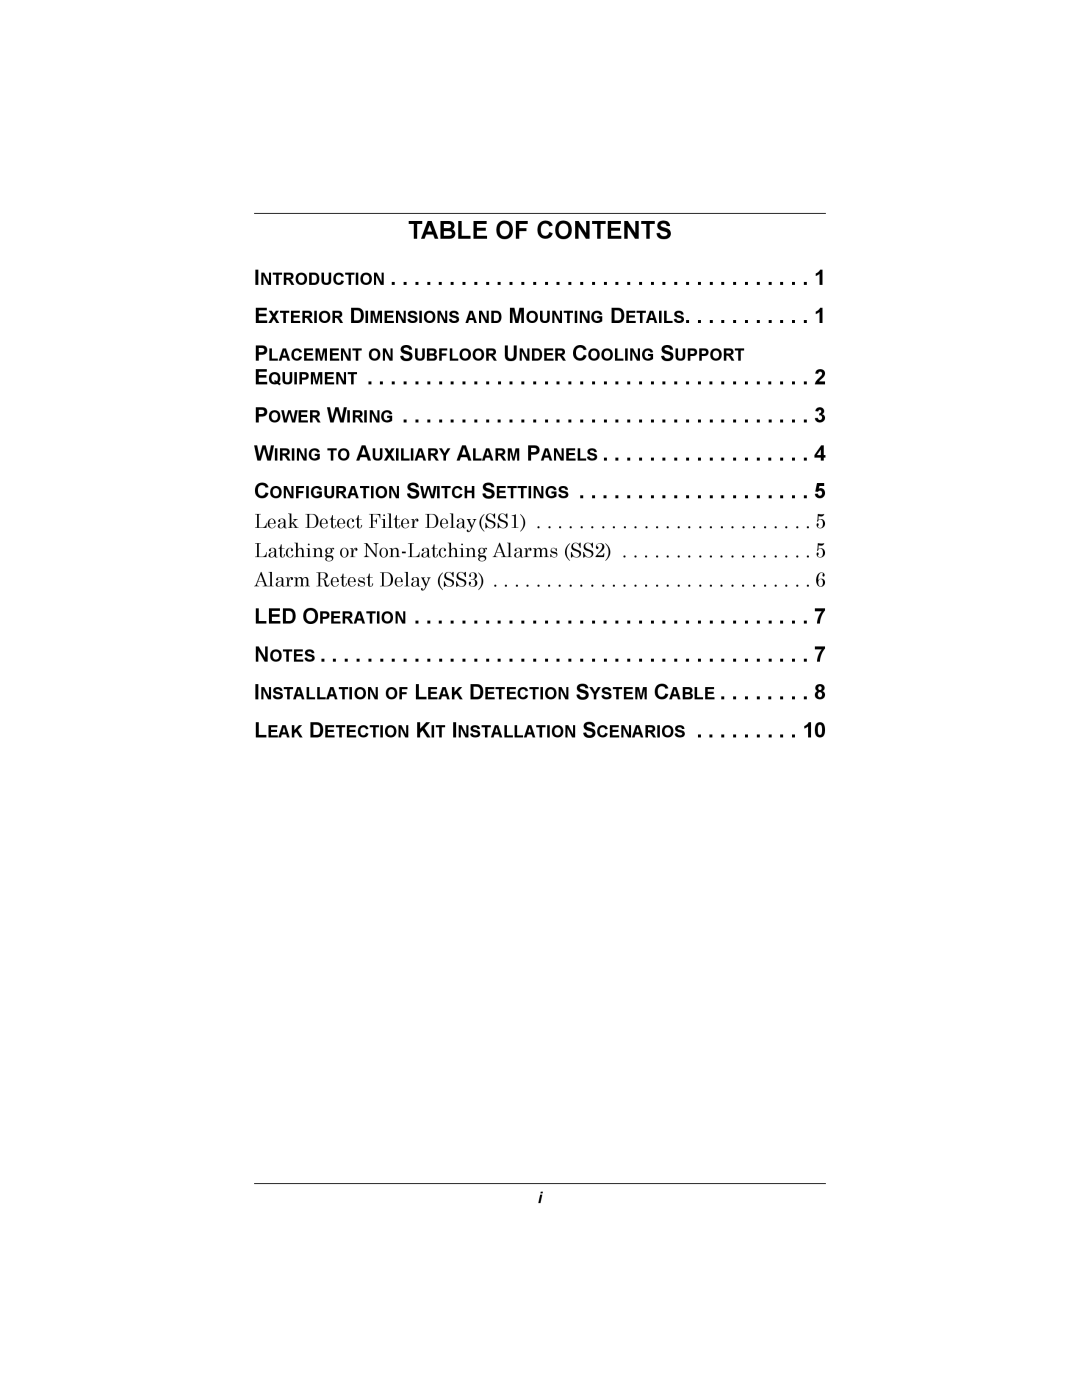 Emerson 460 installation manual Table Of Contents 